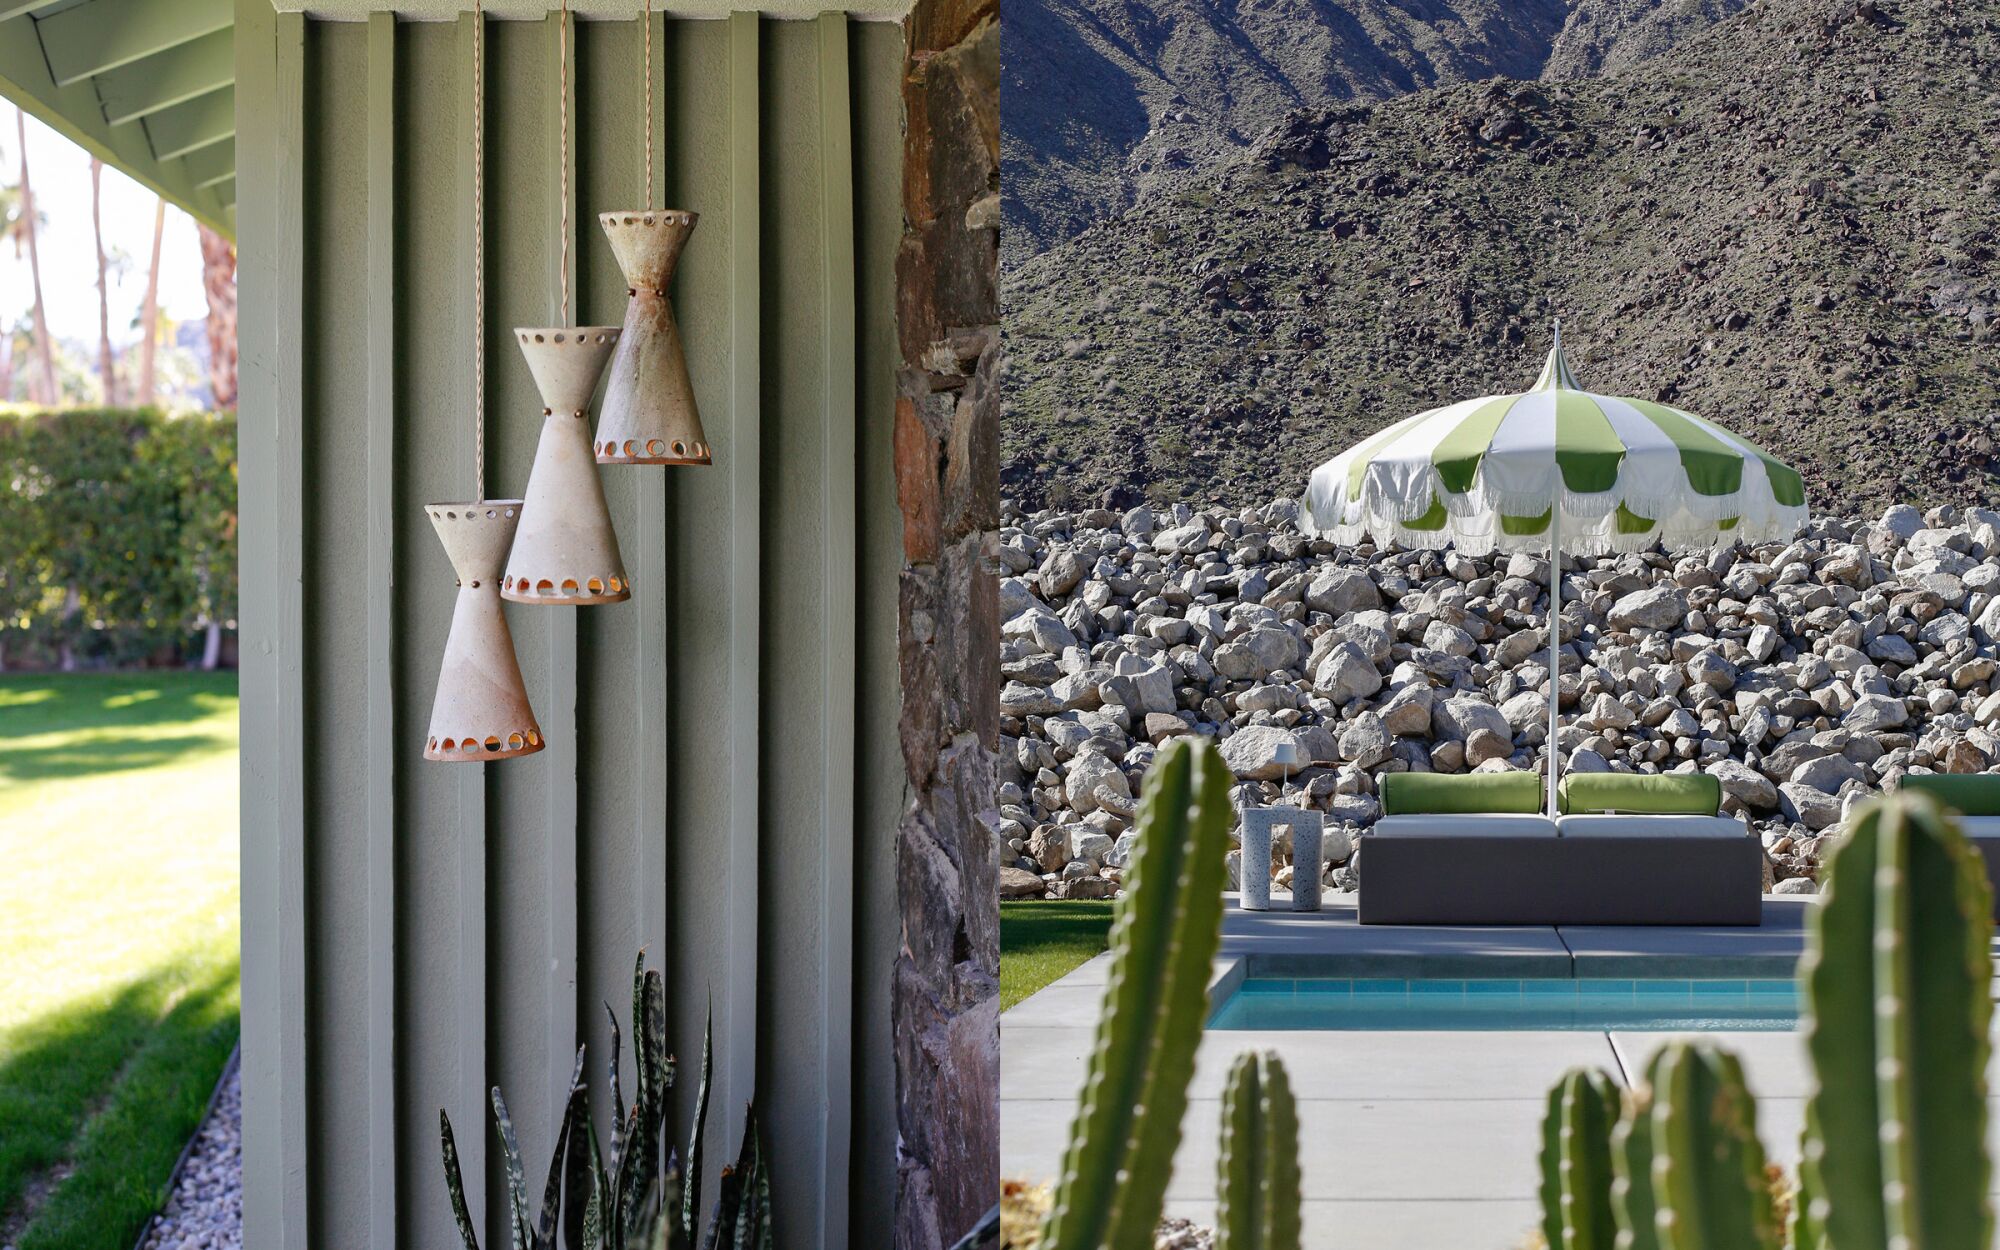 Three lamps hang on a wall over cactus, left; an umbrella shades a seating area with mountains behind.